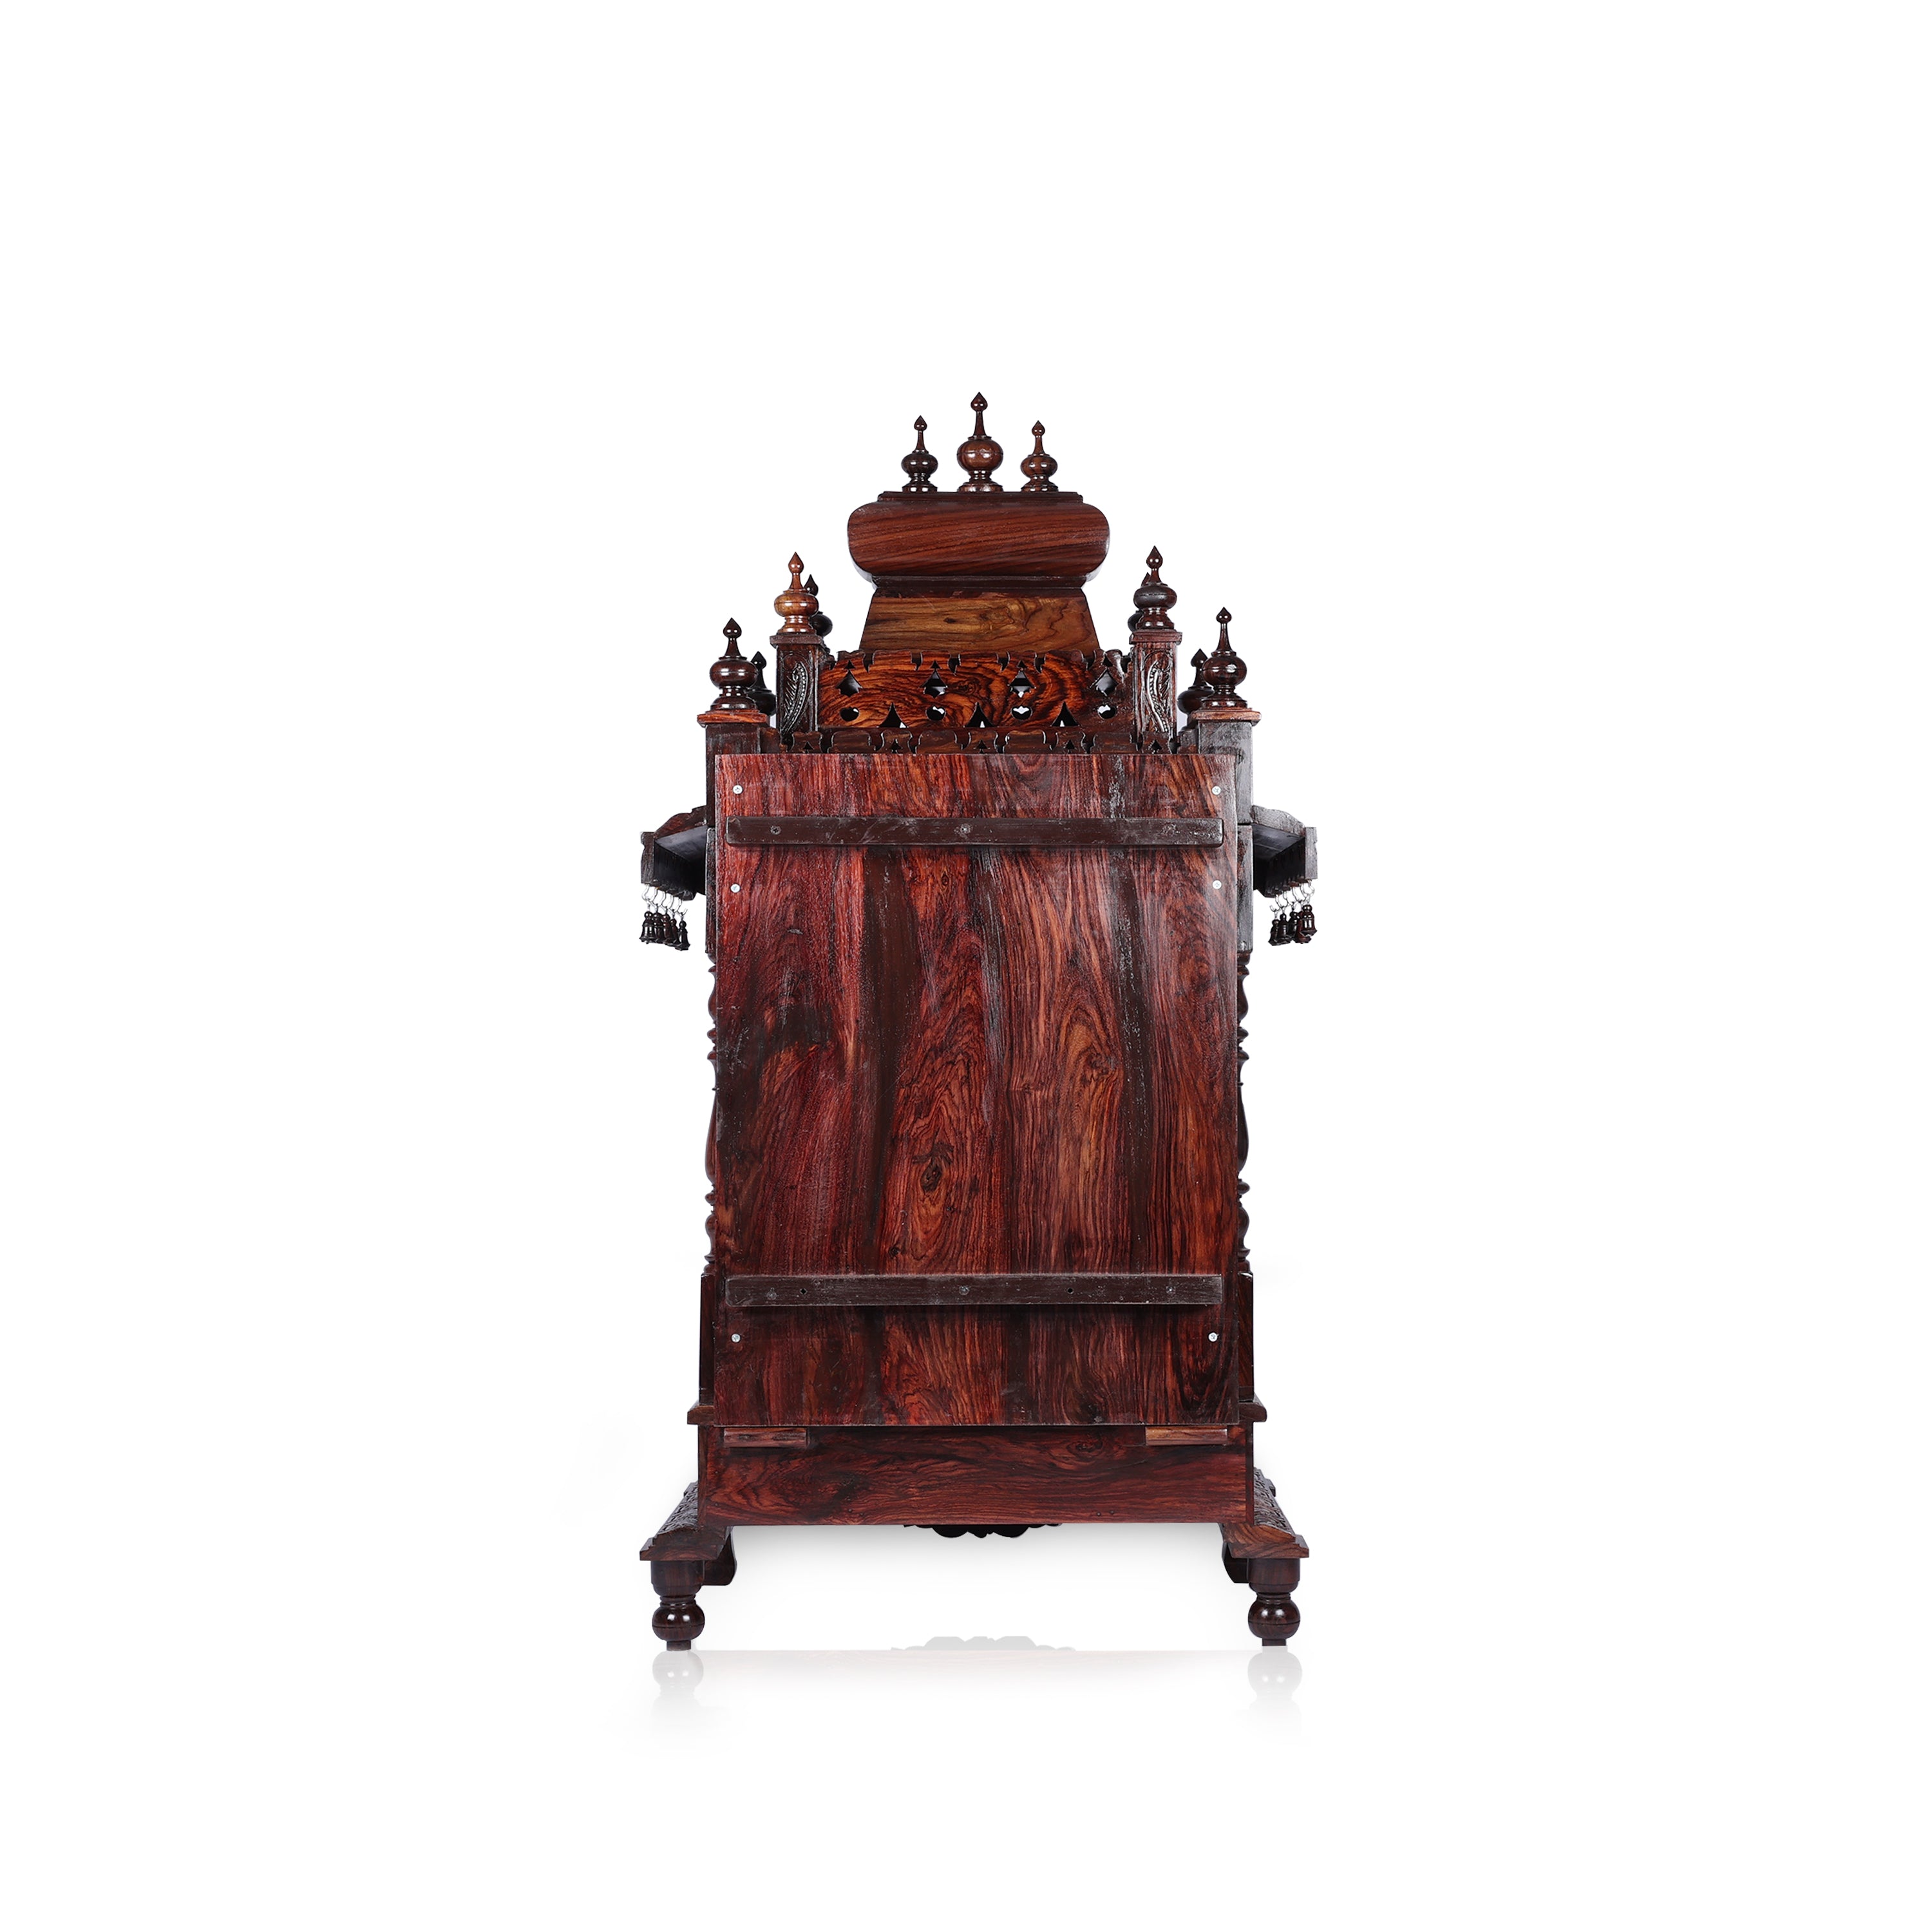 Chetana Rosewood Temple with Ganesha Inlayed with Tray